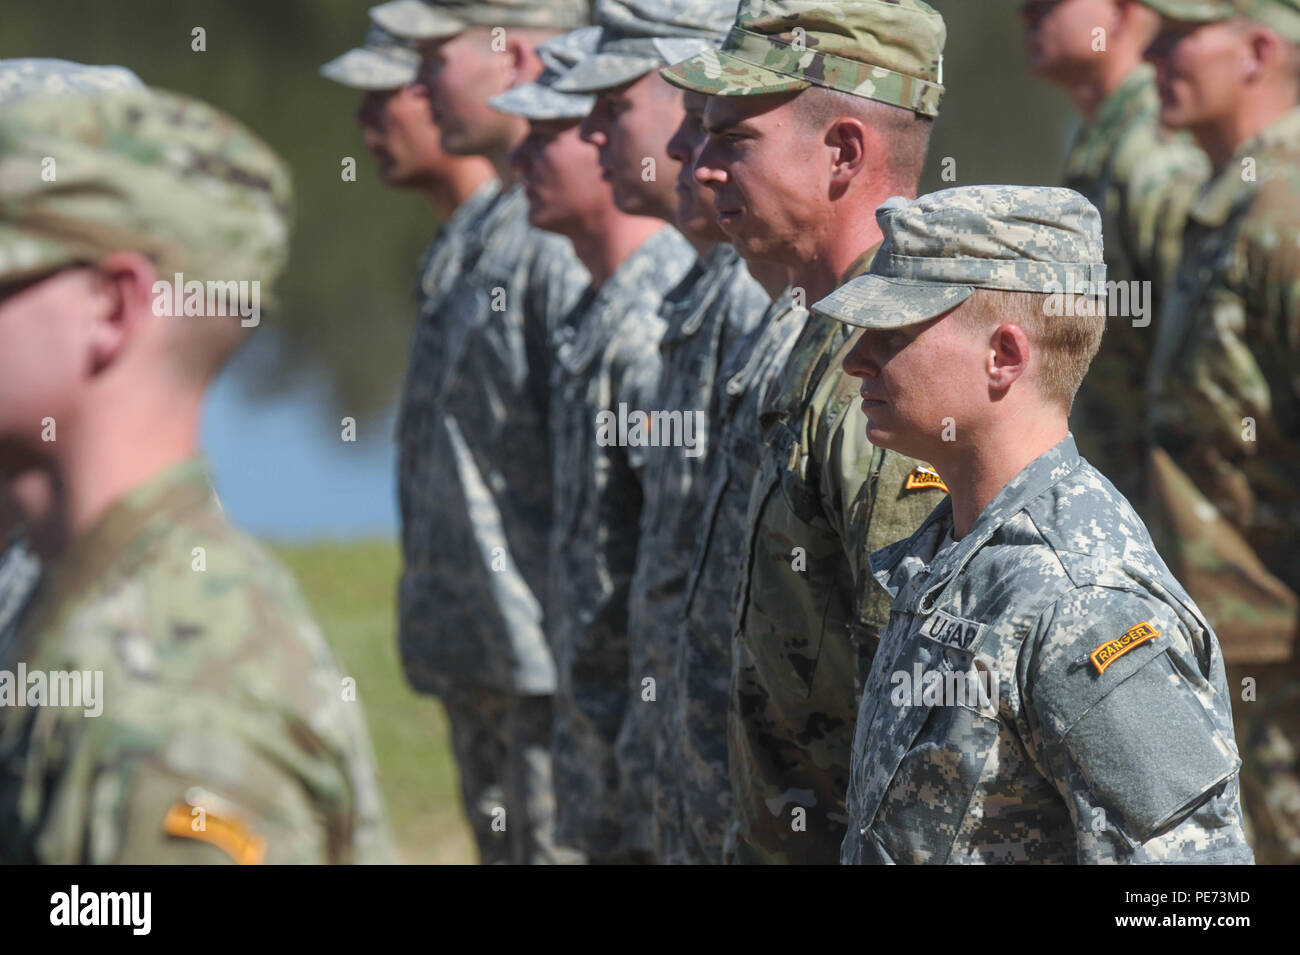 U.S. Army Maj. Lisa Jaster stands in formation during Ranger School graduation on Fort Benning, Ga., Oct. 16, 2015. Jaster is an Army reservist and the third woman to graduate Ranger School. (U.S. Army photo by Staff Sgt. Alex Manne/Released) Stock Photo